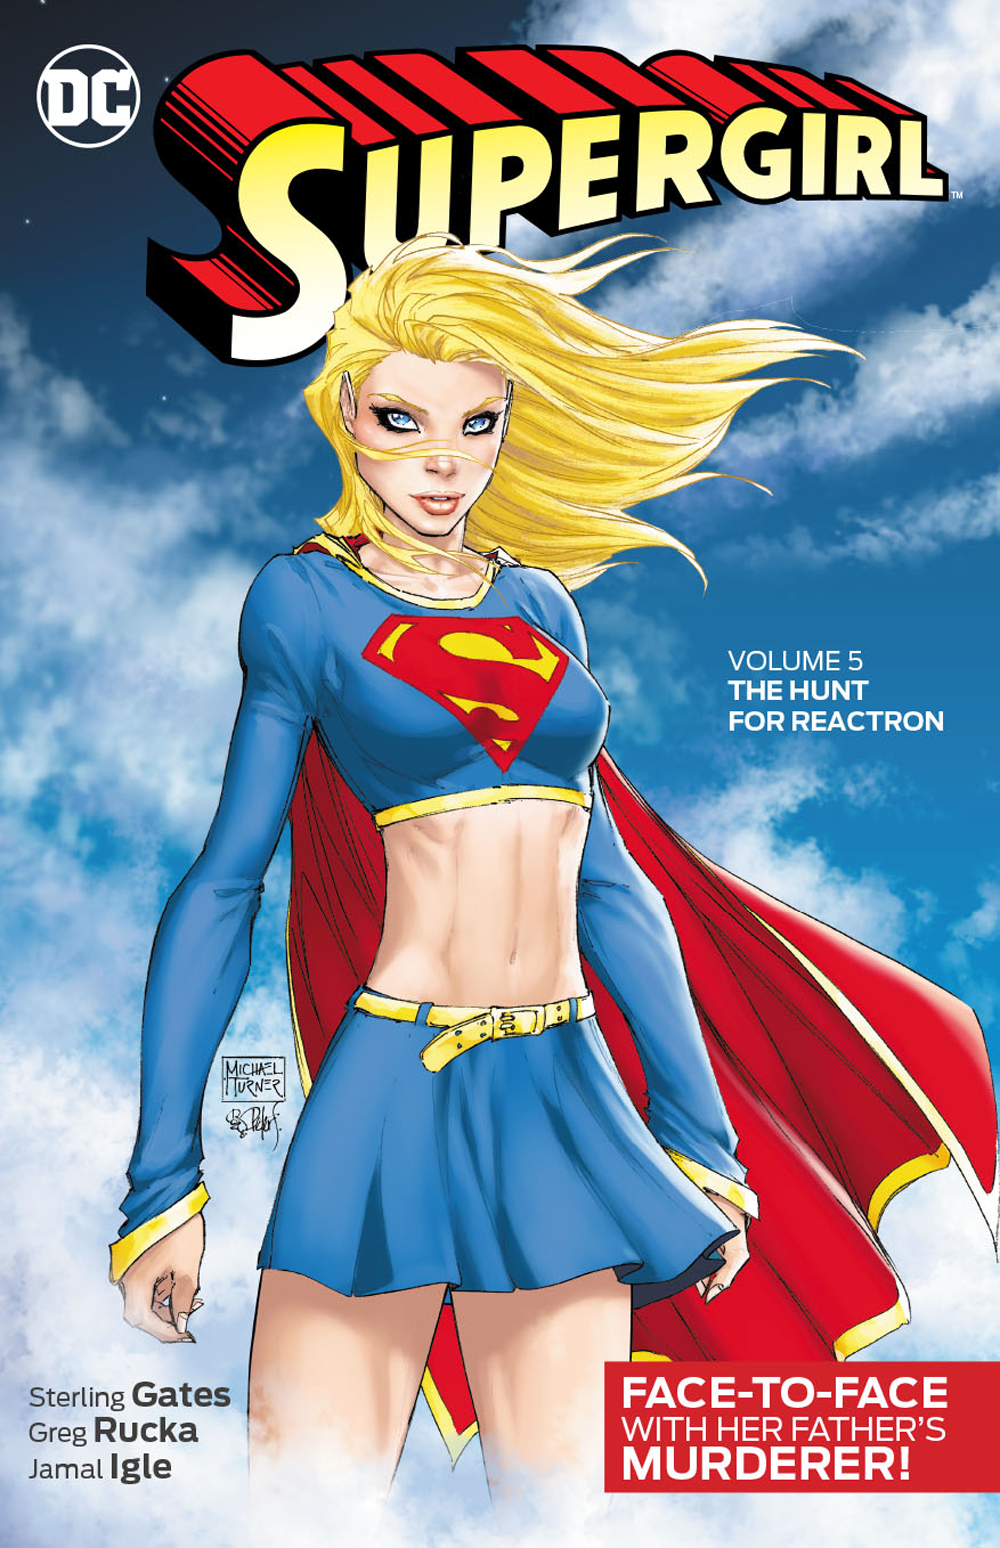 Supergirl Volume 5: The Hunt for Reactron TP